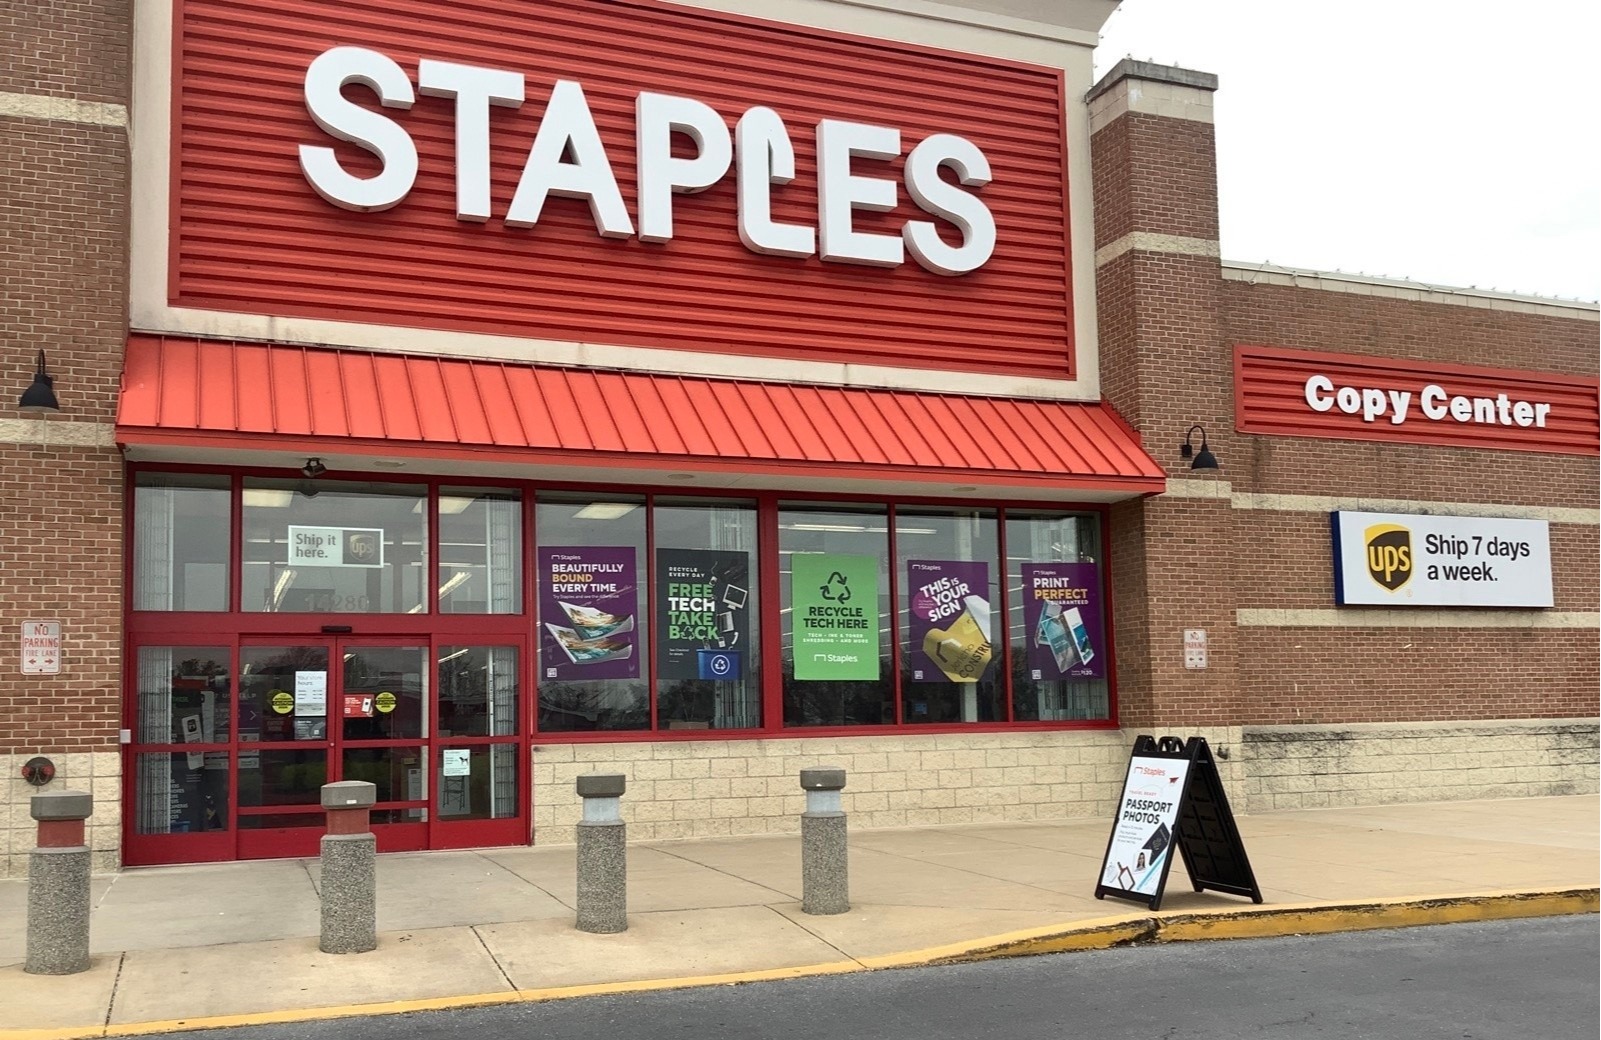 Staples, This is the Staples in the new Steelyard Commons s…